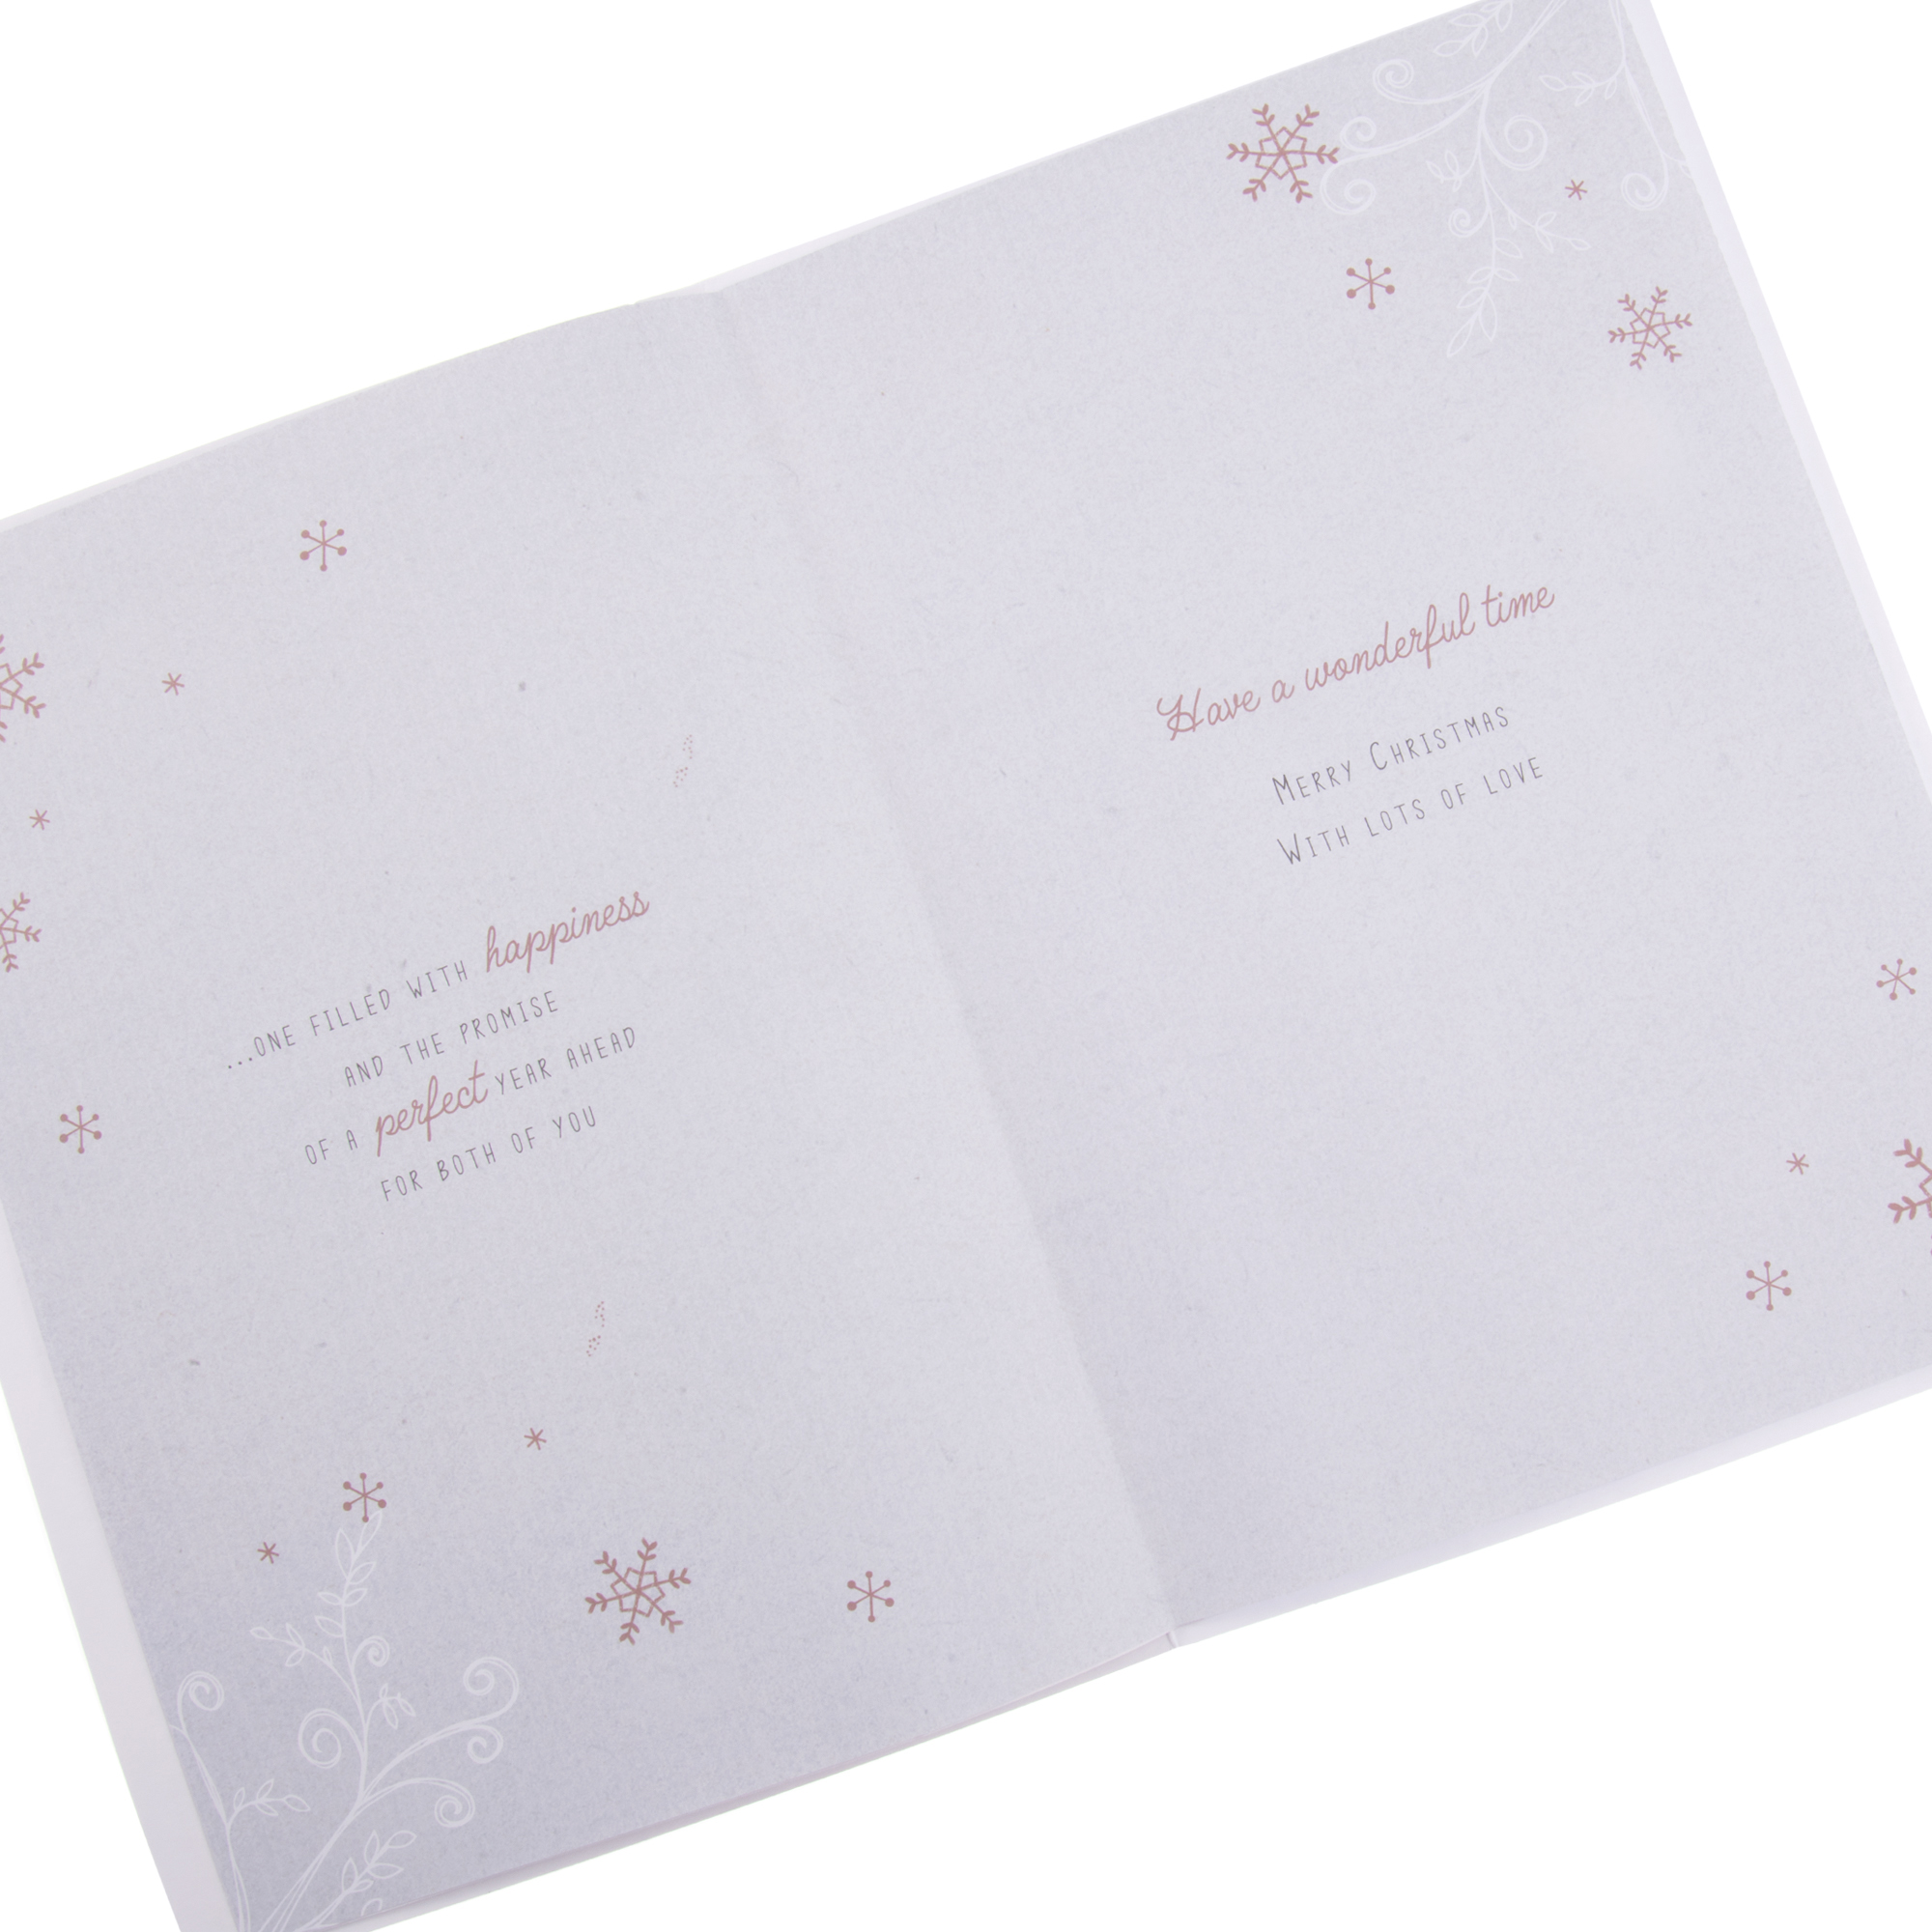 Christmas Card - A Special Daughter & Her Partner